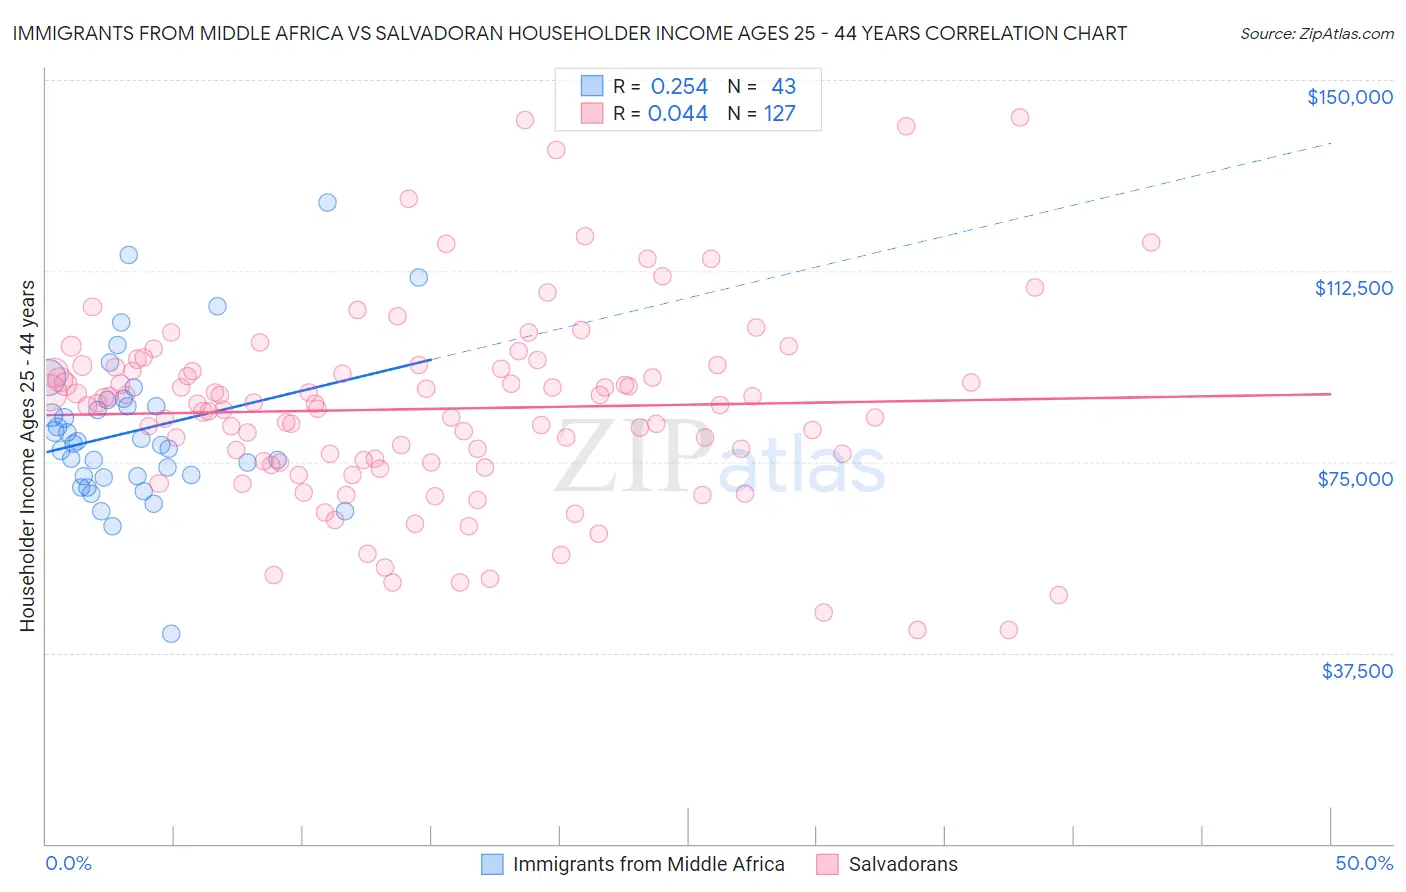 Immigrants from Middle Africa vs Salvadoran Householder Income Ages 25 - 44 years